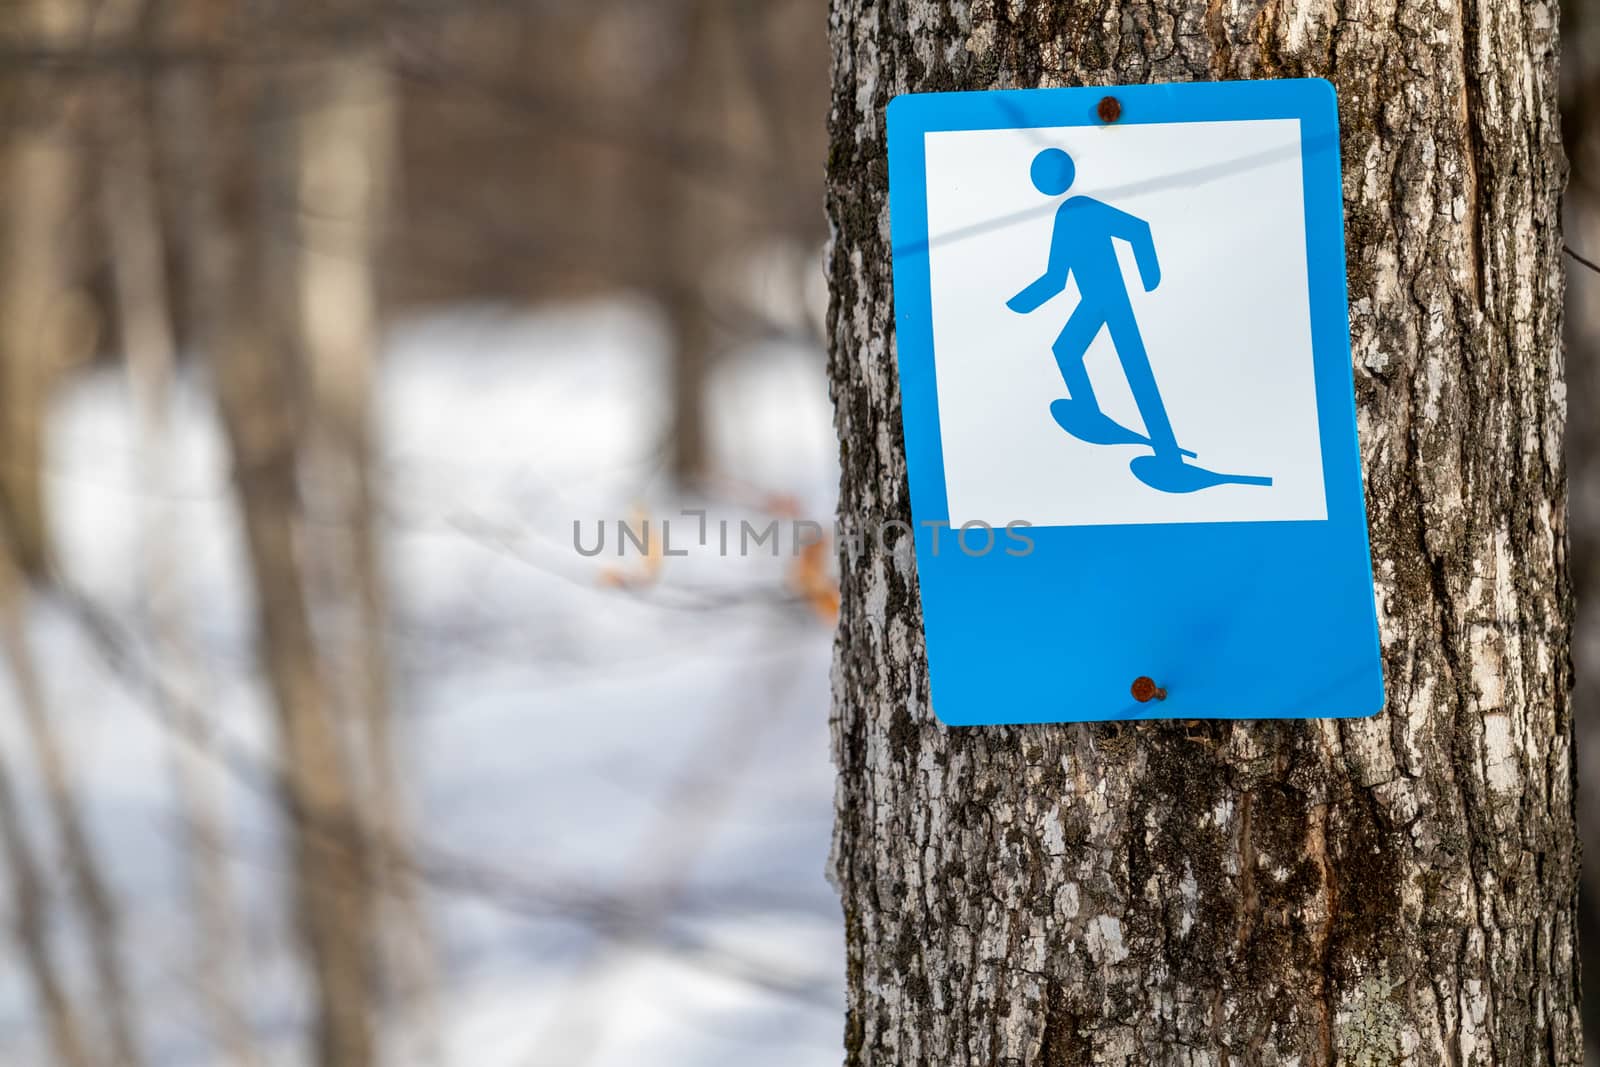 A blue-and-white sign features an illustration of a stick figure wearing snowshoes. This trail marker indicates a trail suitable for snowshoeing in the winter season.